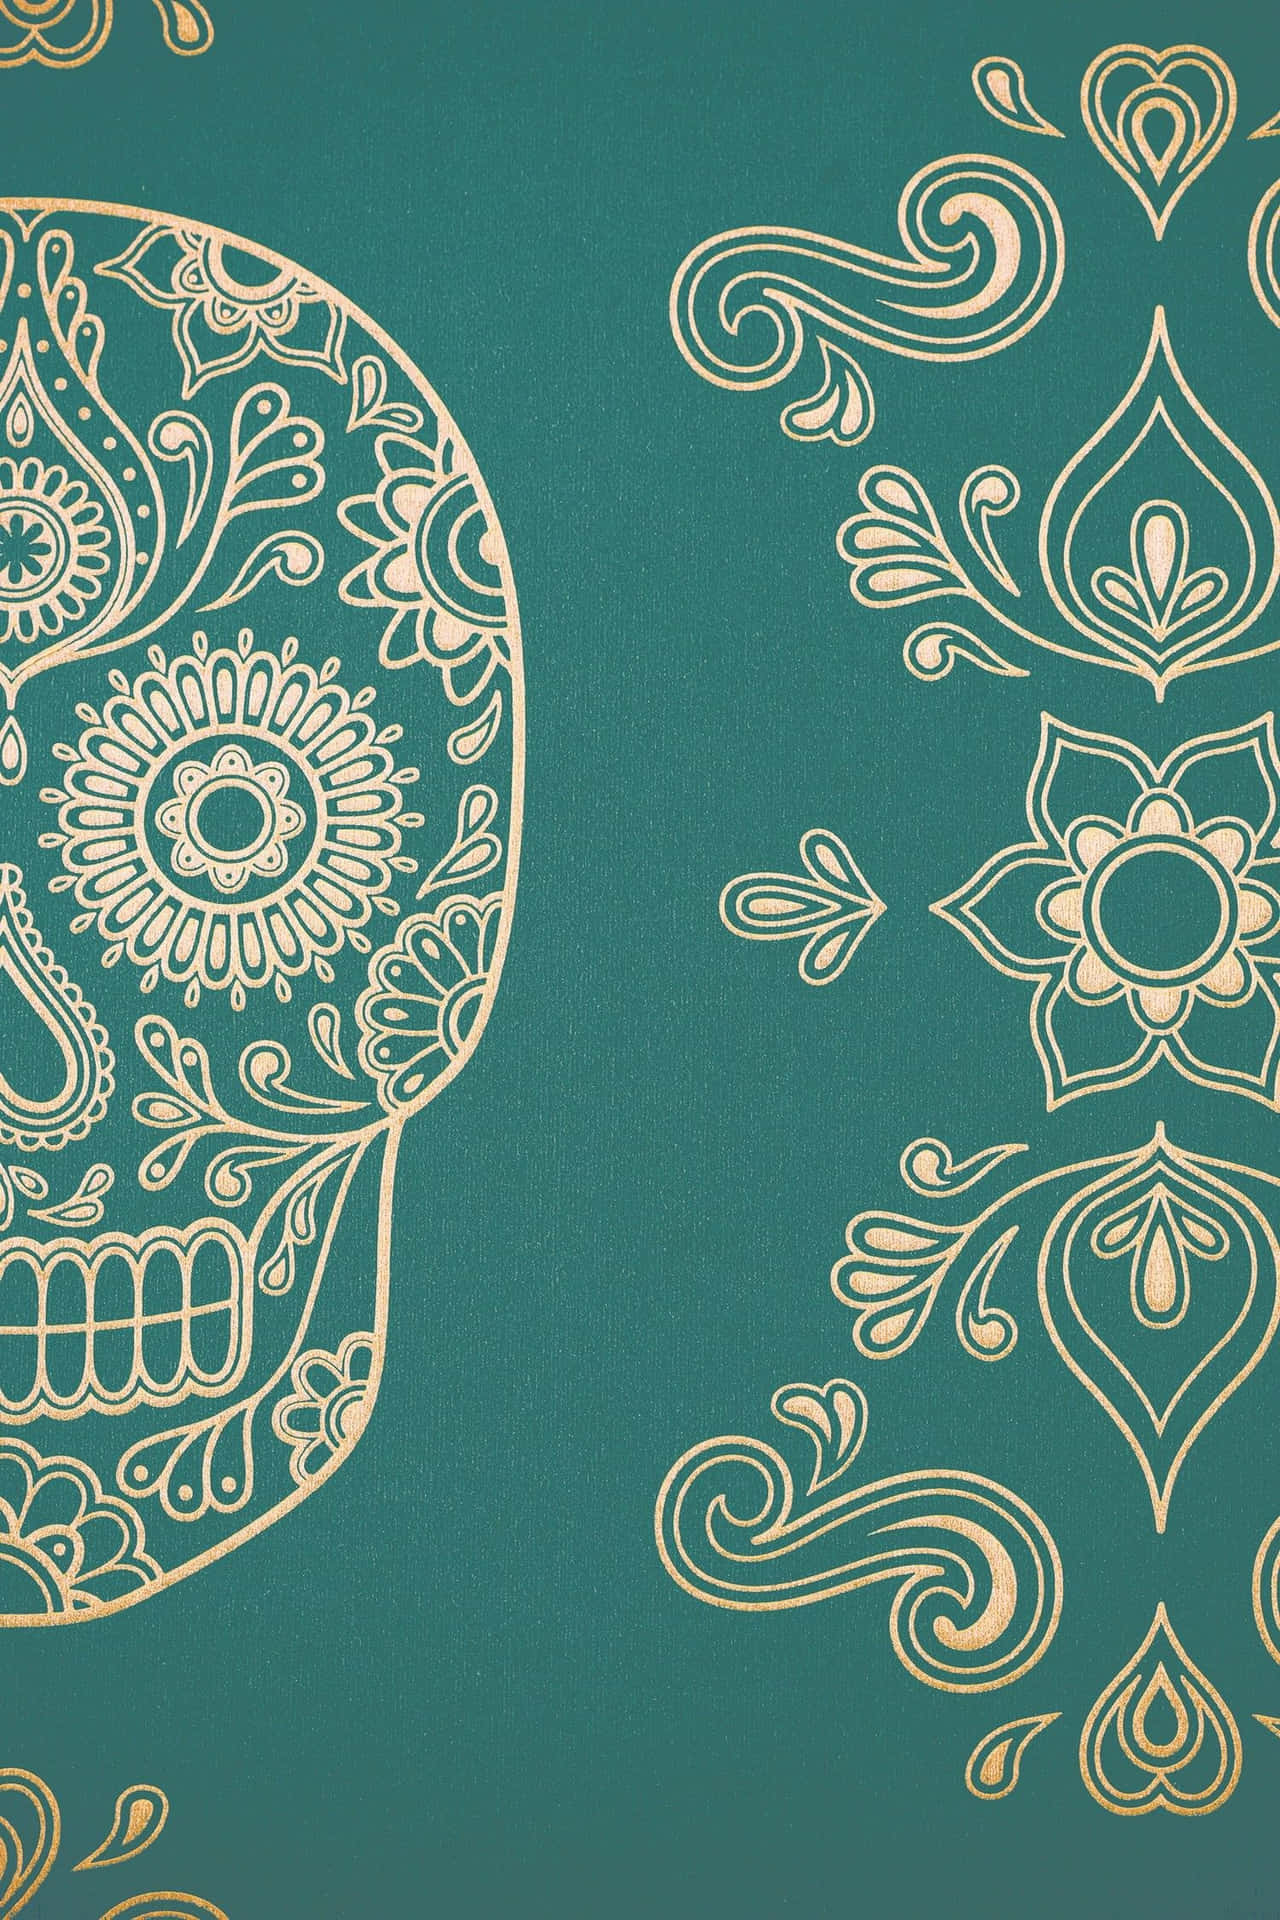 A Gold Sugar Skull On A Teal Background